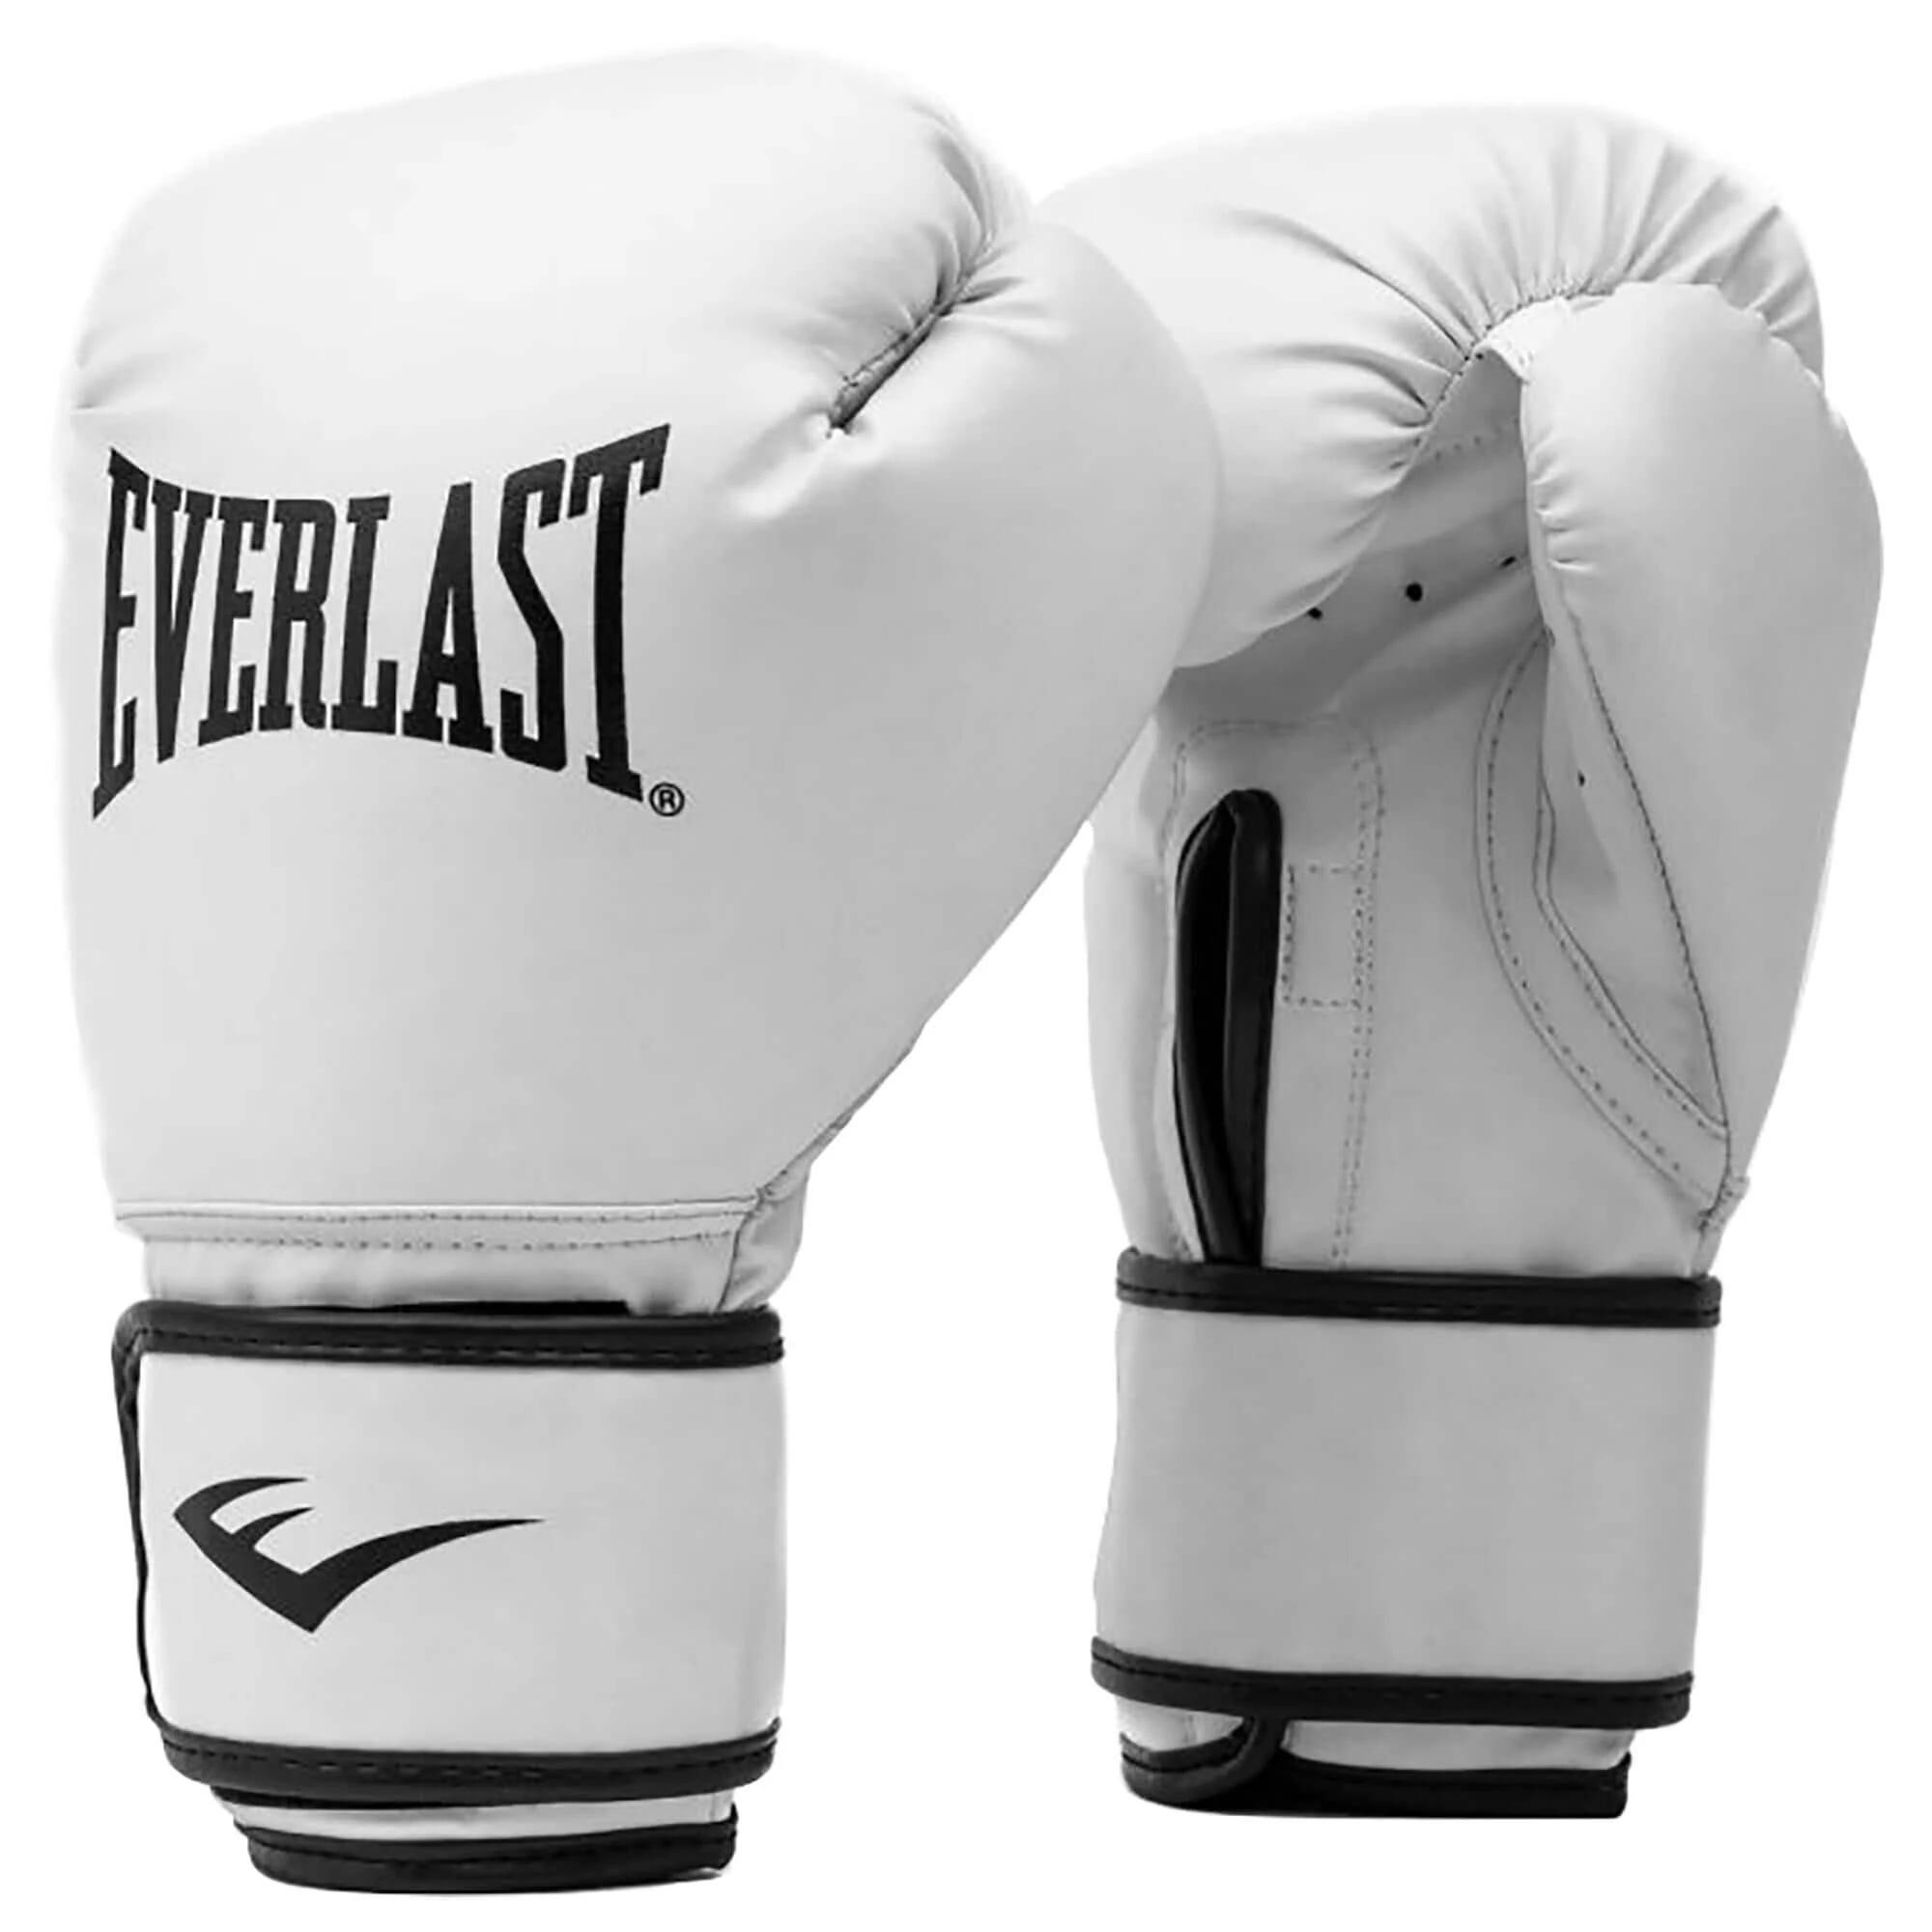 Premium Synthetic Leather Boxing Gloves for Fitness Training | Image